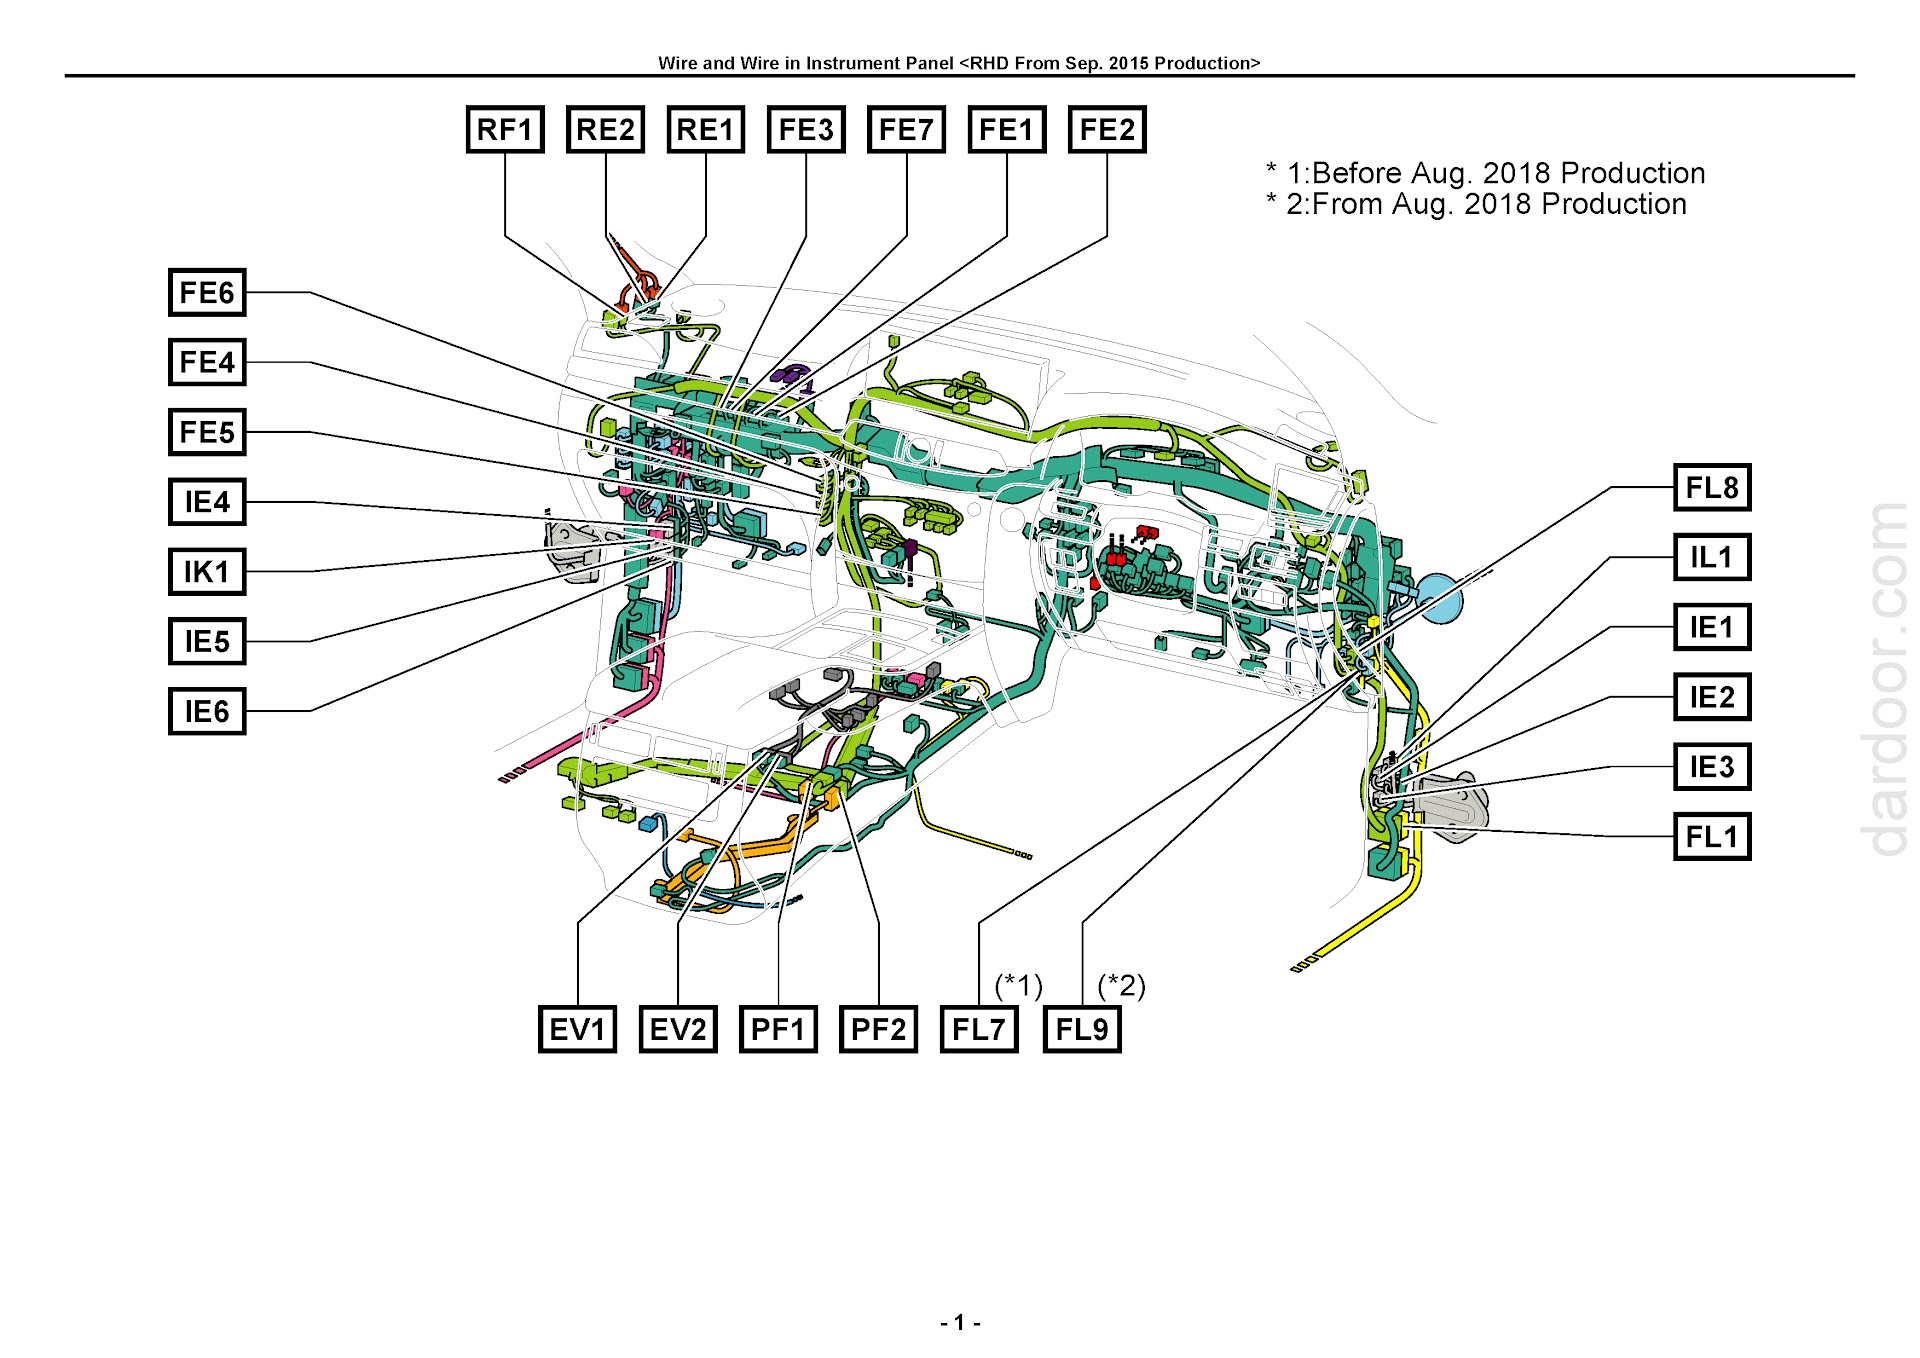 2018 Lexus LX 570 and LX 460 Wiring Diagram, Wire hanress in Instrument Panel